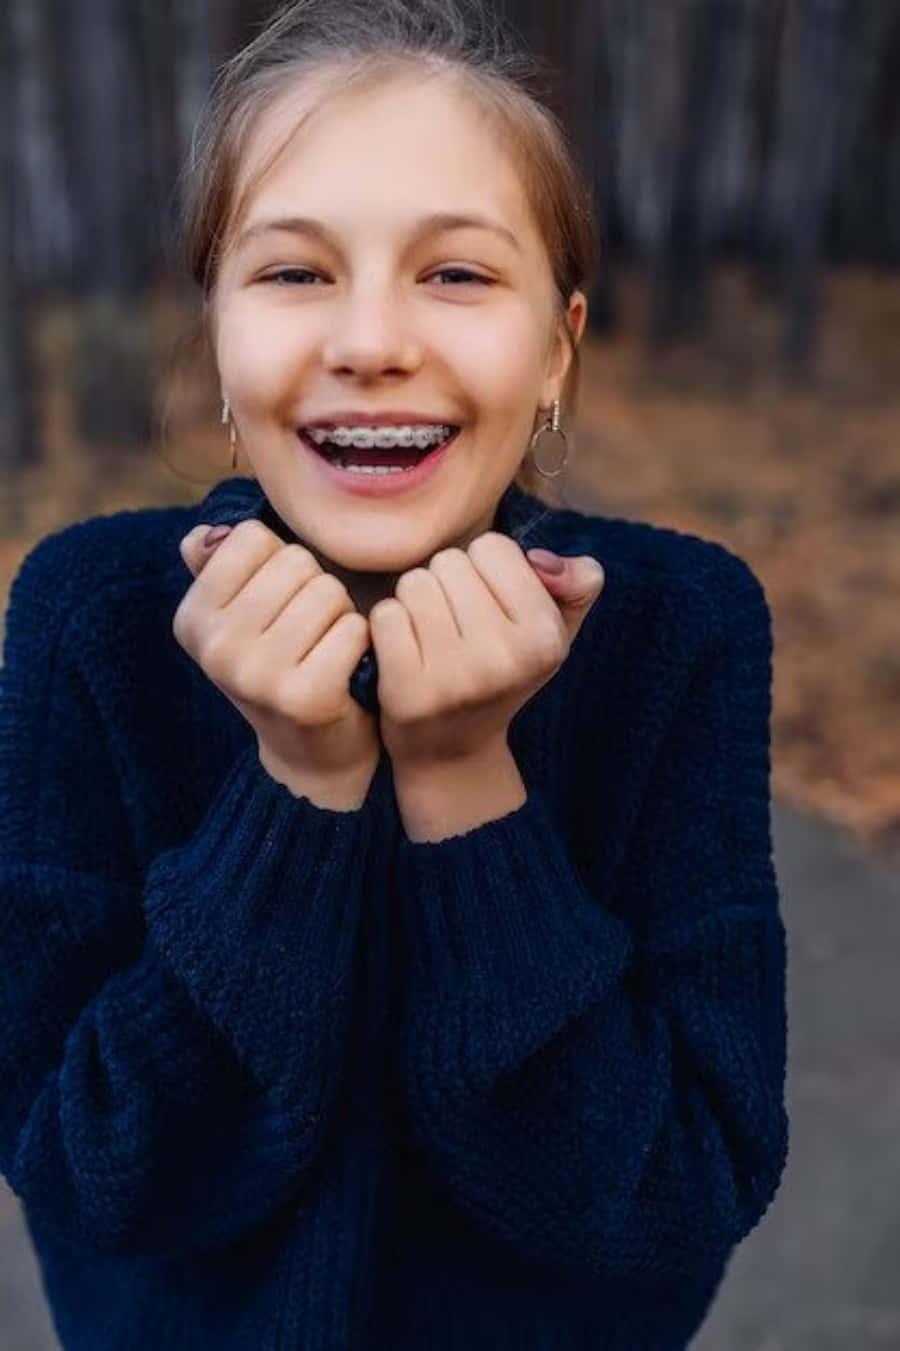 A Girl Smiling With Braces On Her Teeth